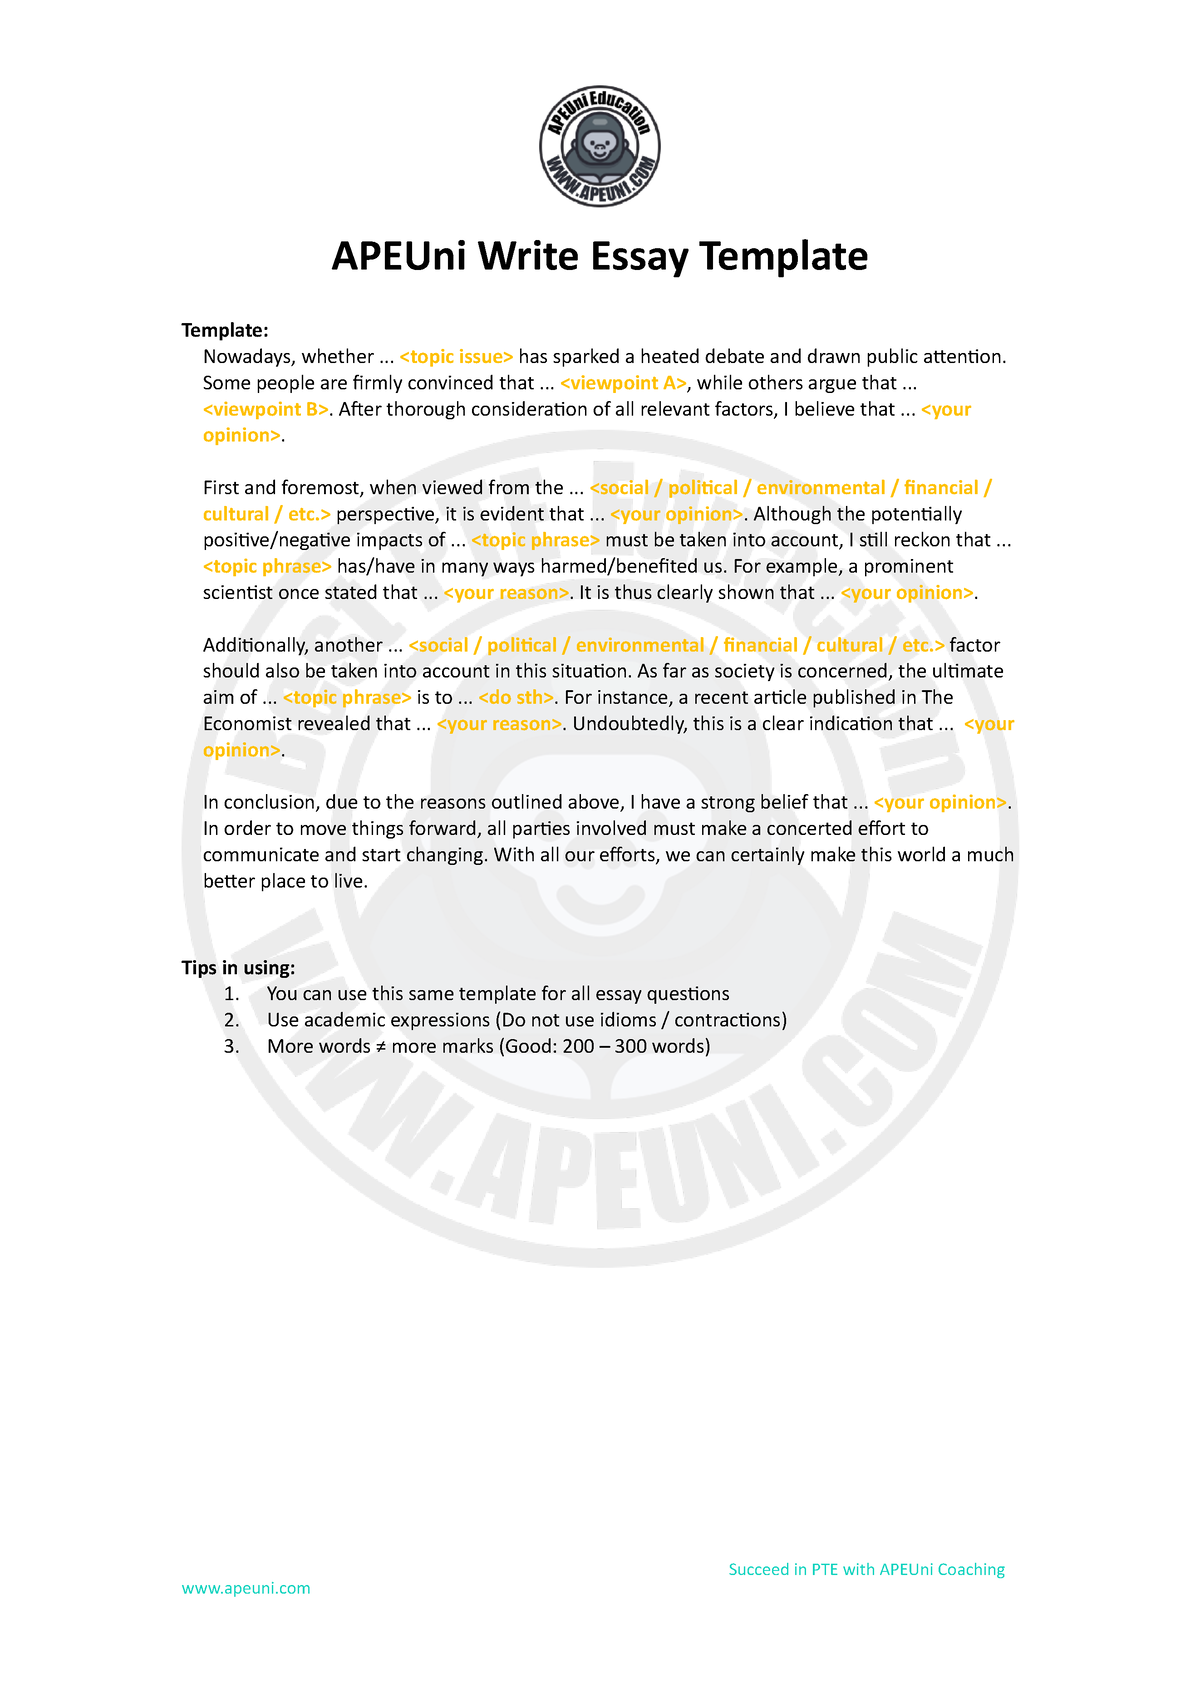 apeuni-write-essay-template-succeed-in-pte-with-apeuni-coaching